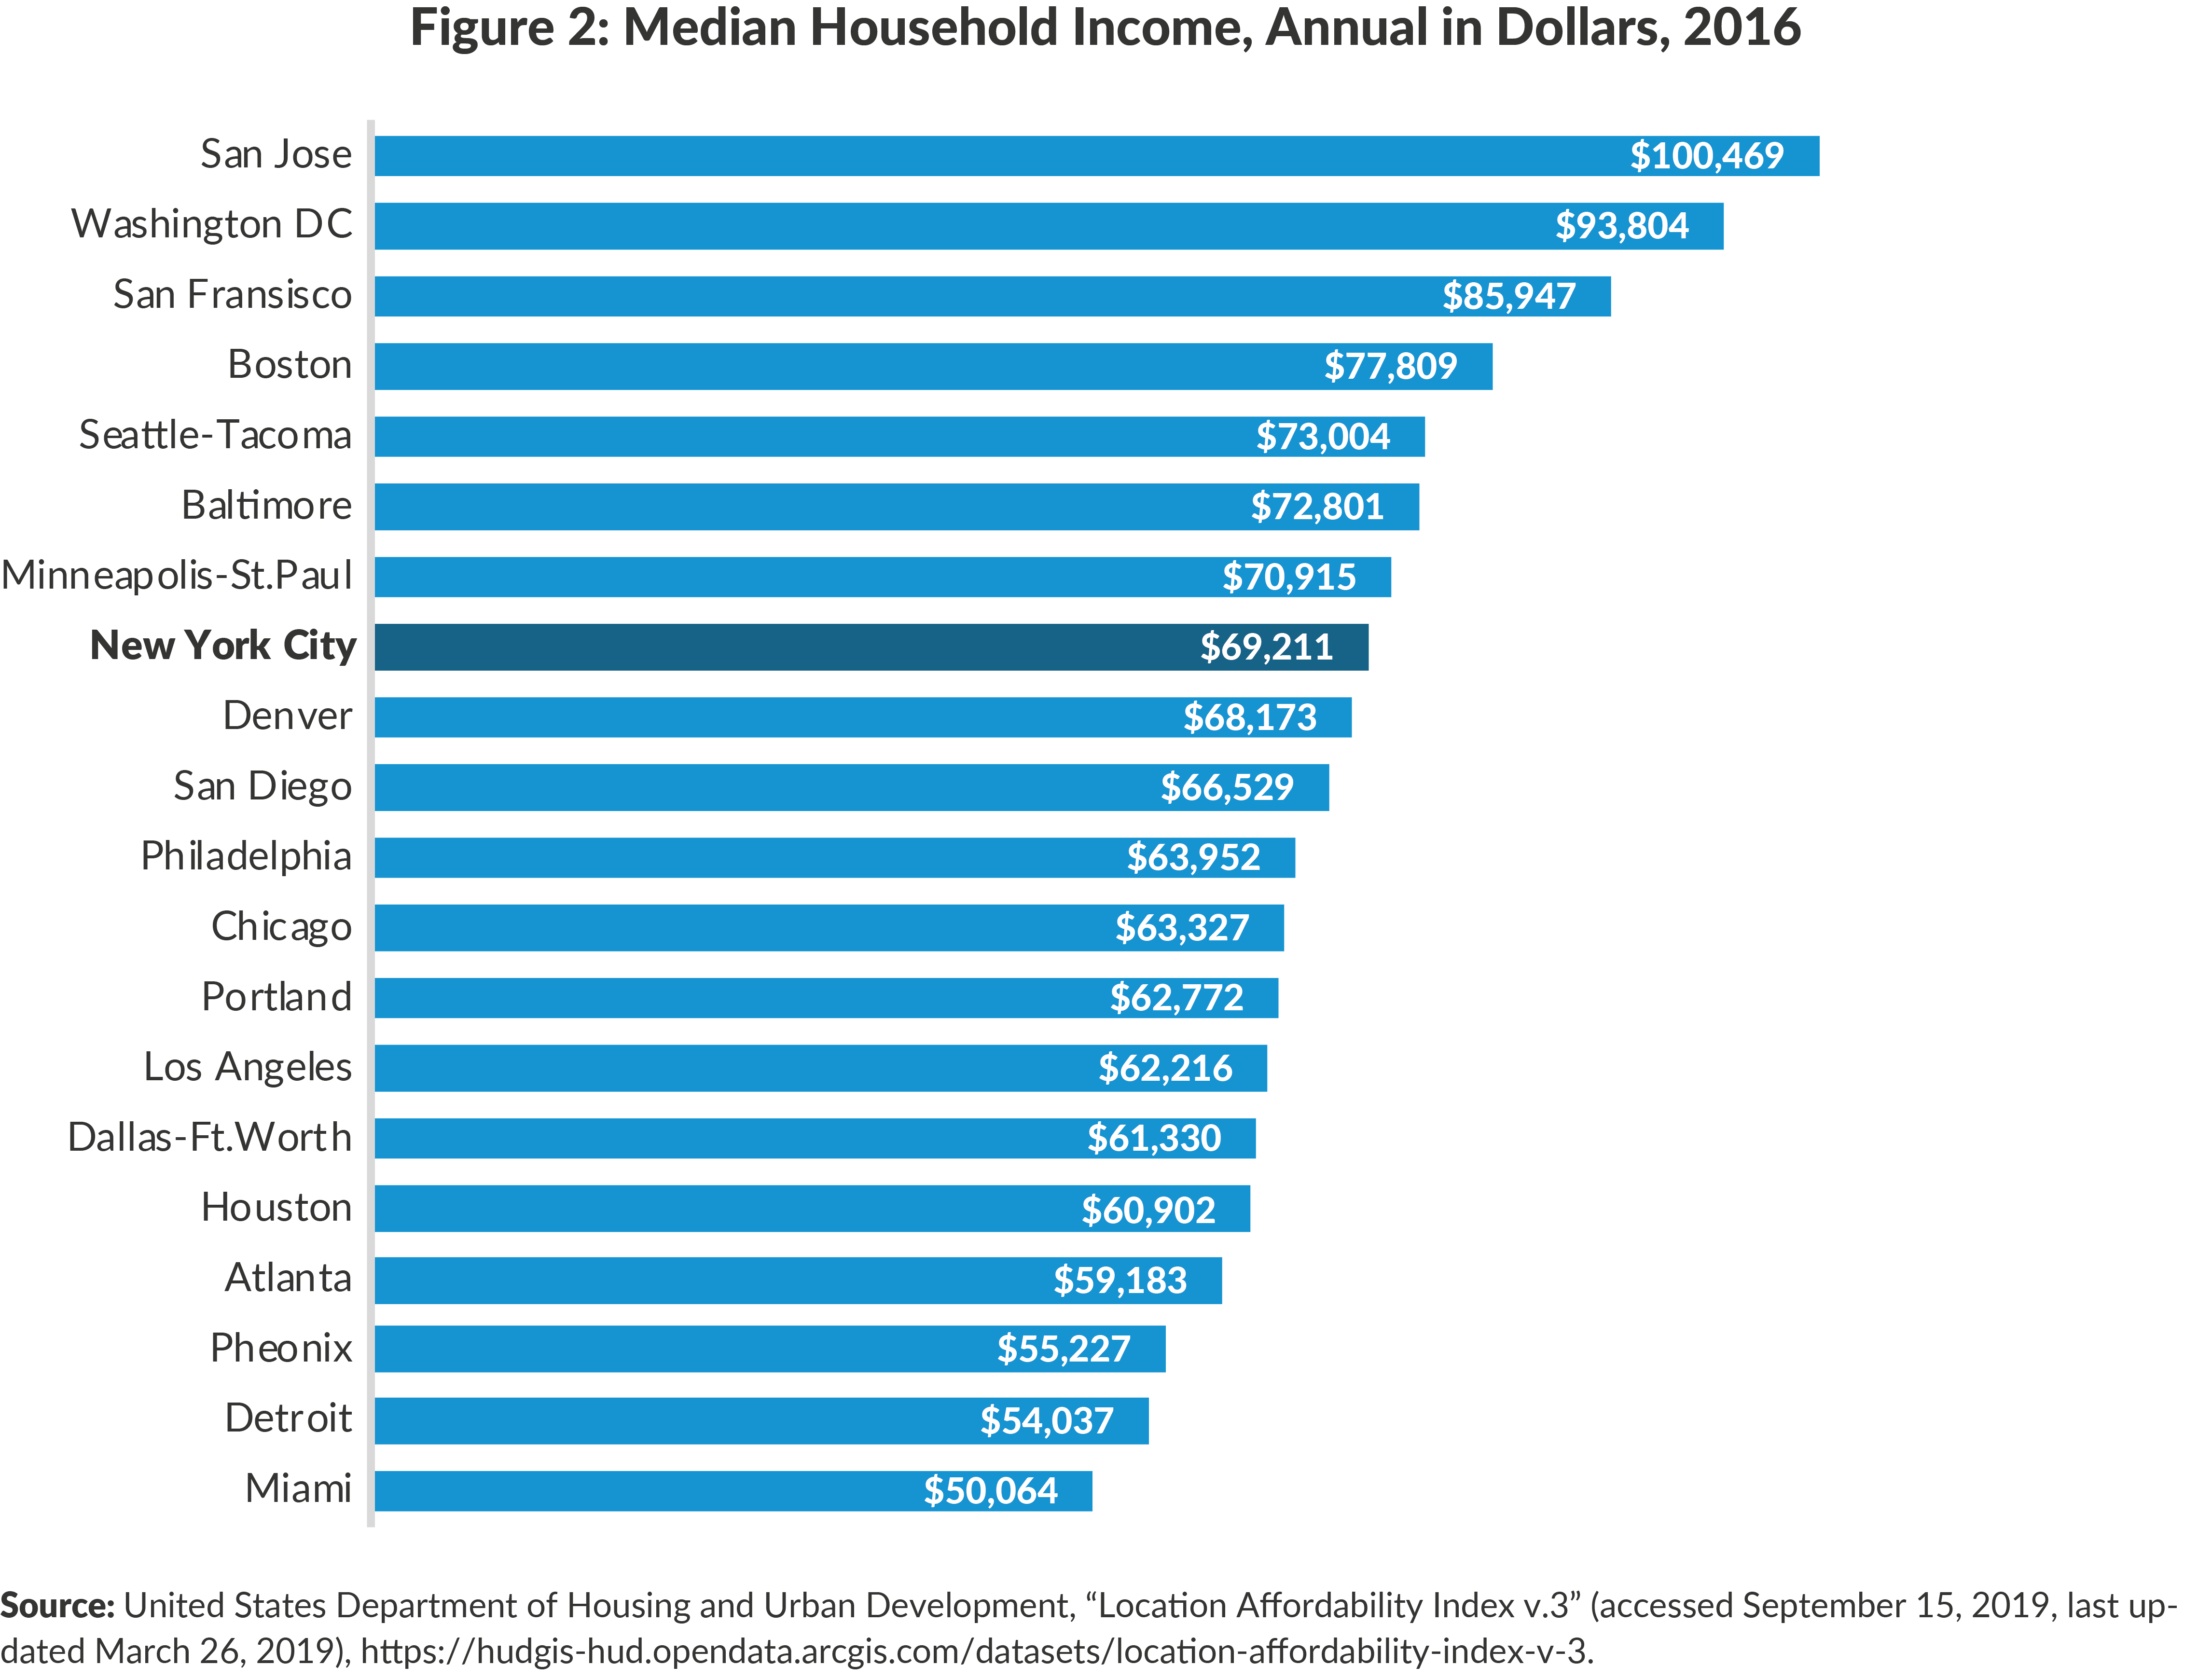 Figure 2. Median Household Income, Annual in Dollars, 2016